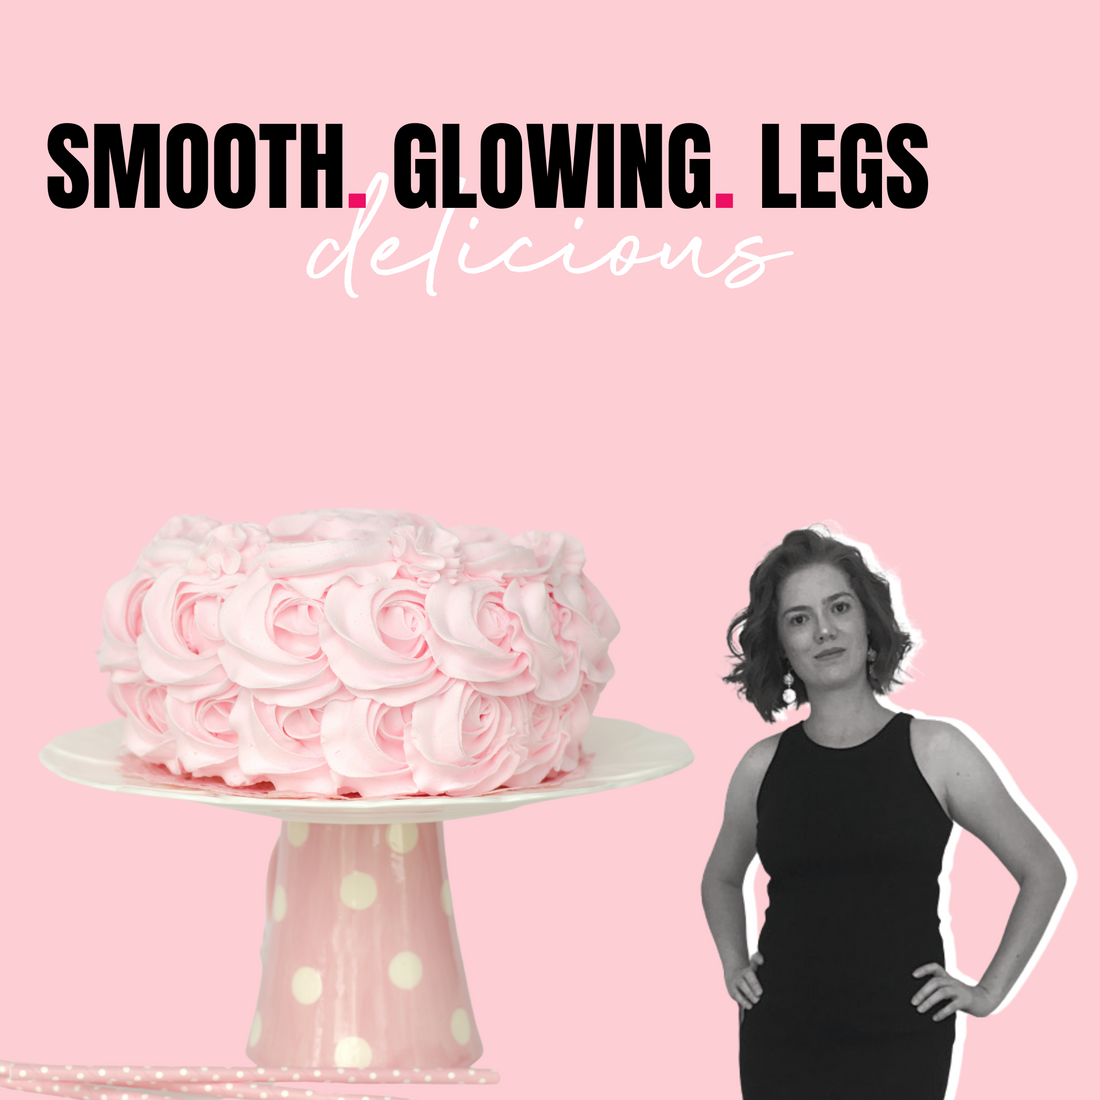 How To Get Smooth, Glowing Legs